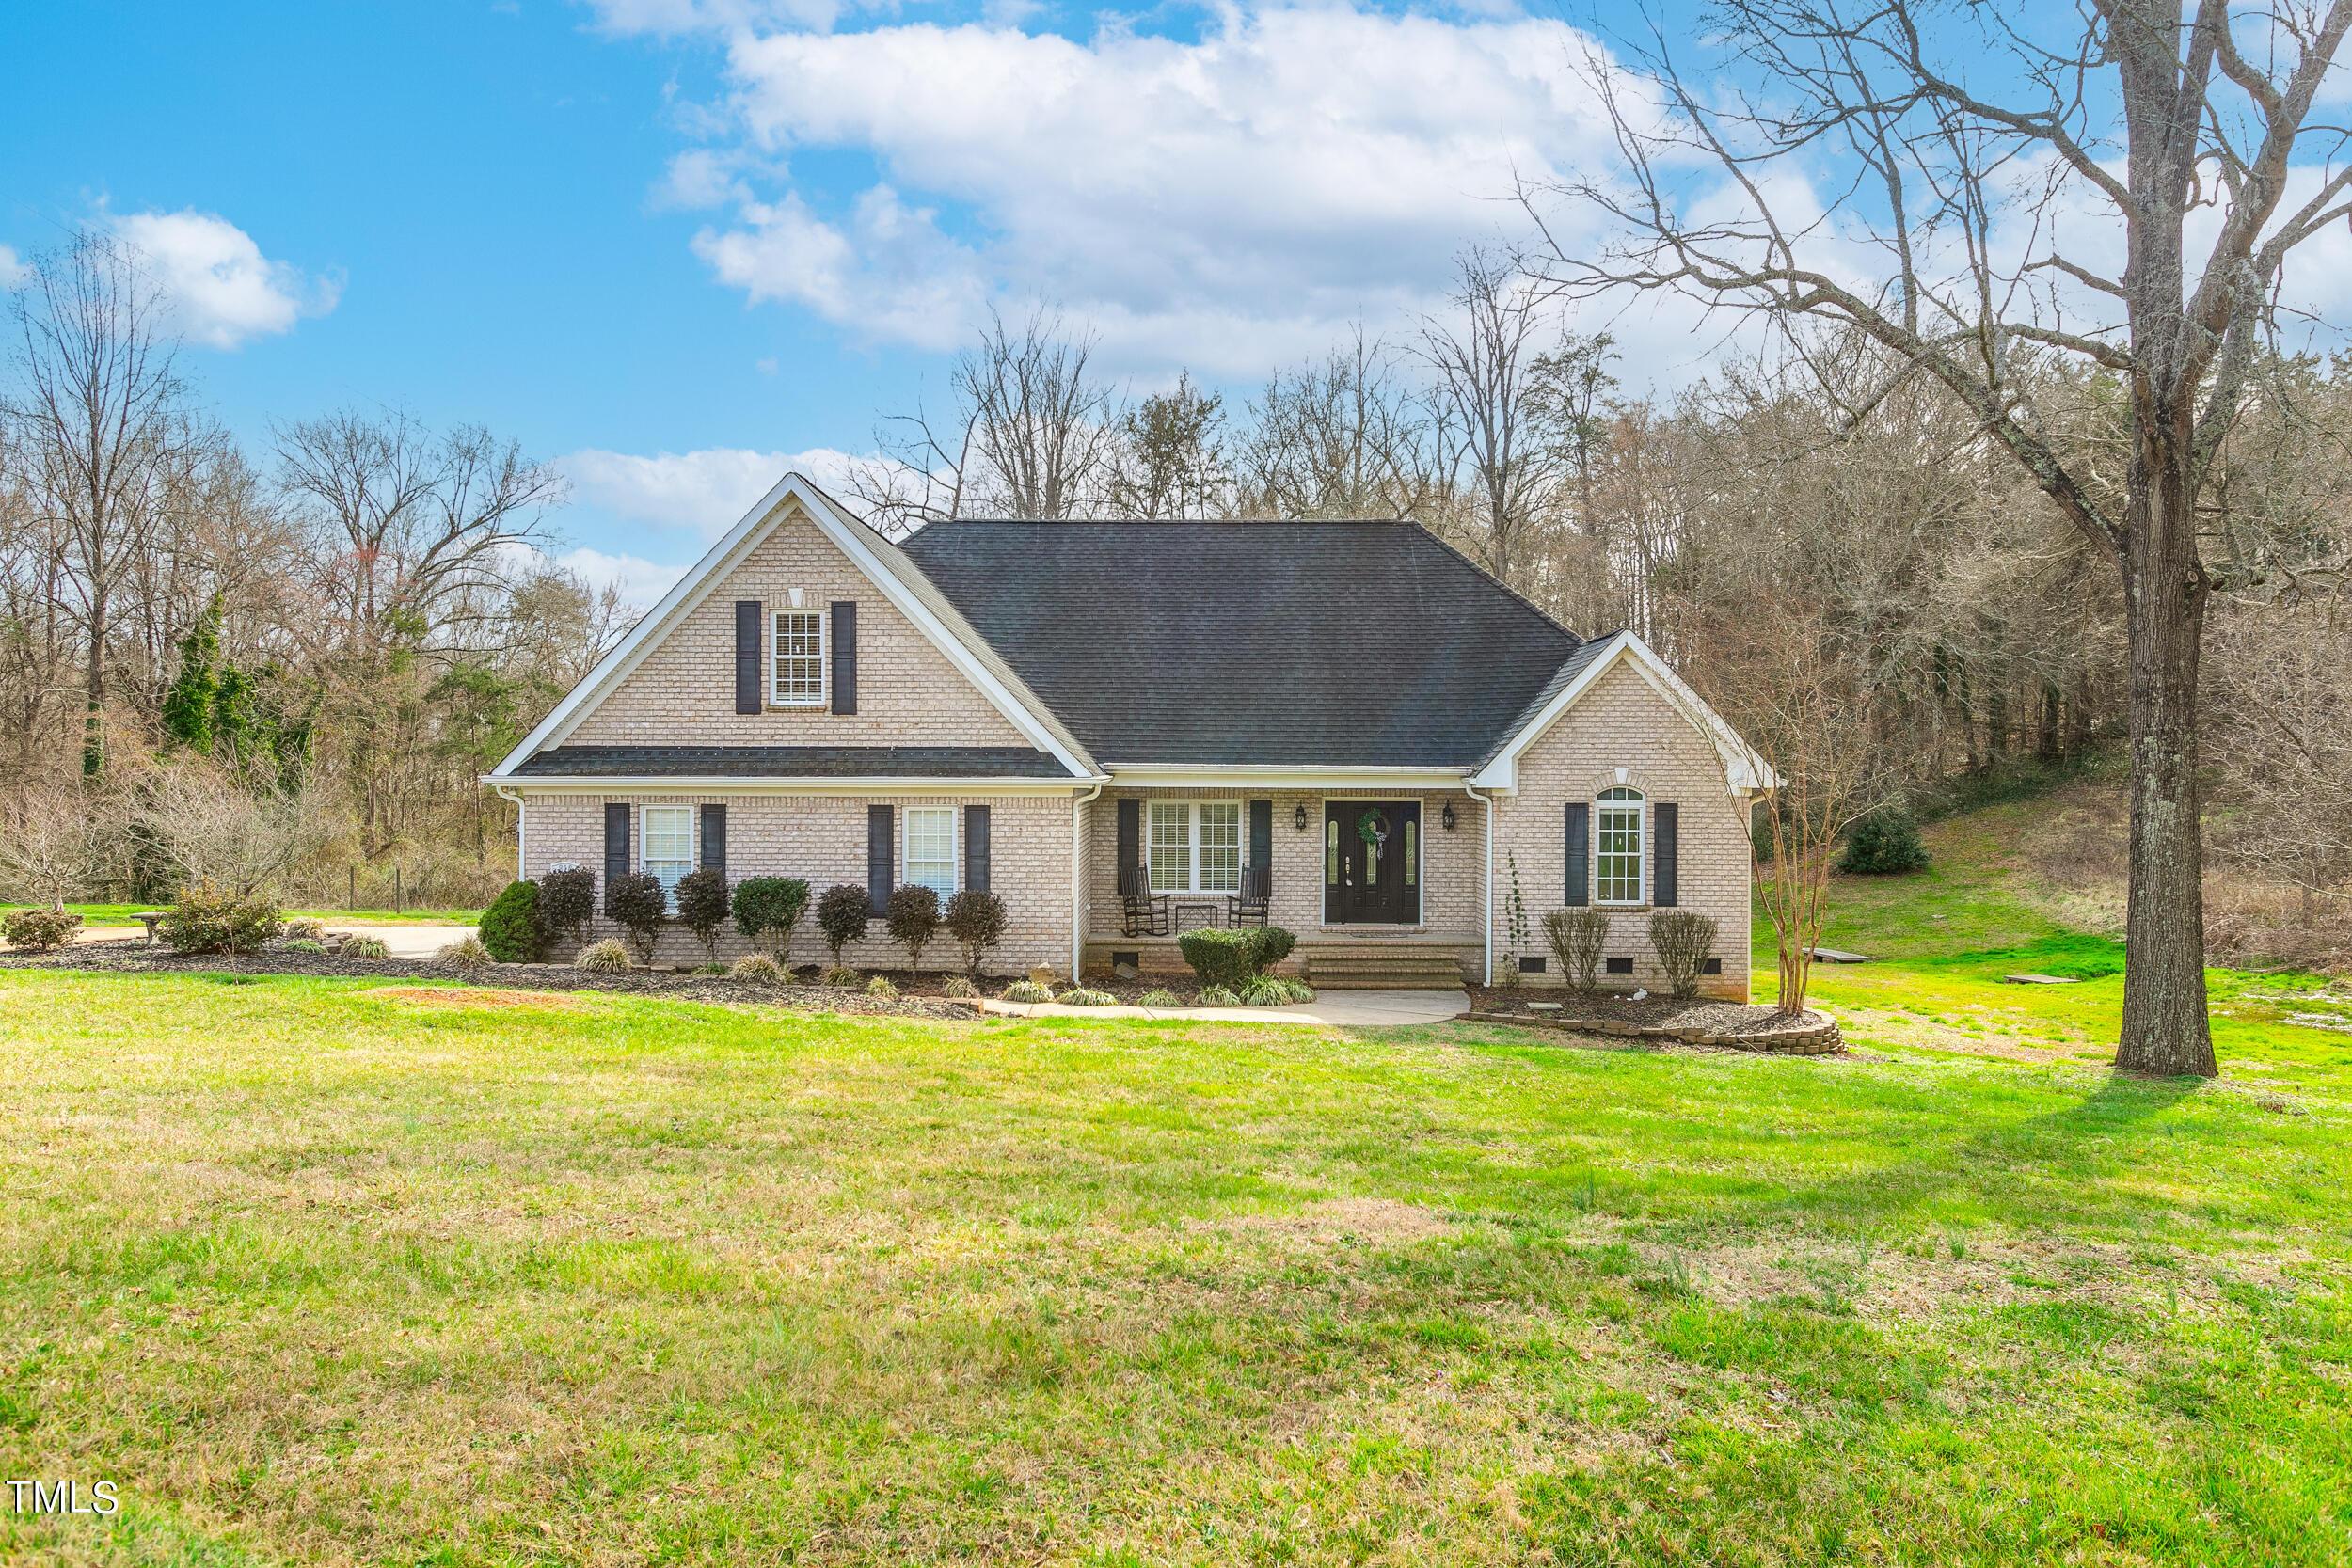 Photo one of 810 S Marye Dr Graham NC 27253 | MLS 10013774